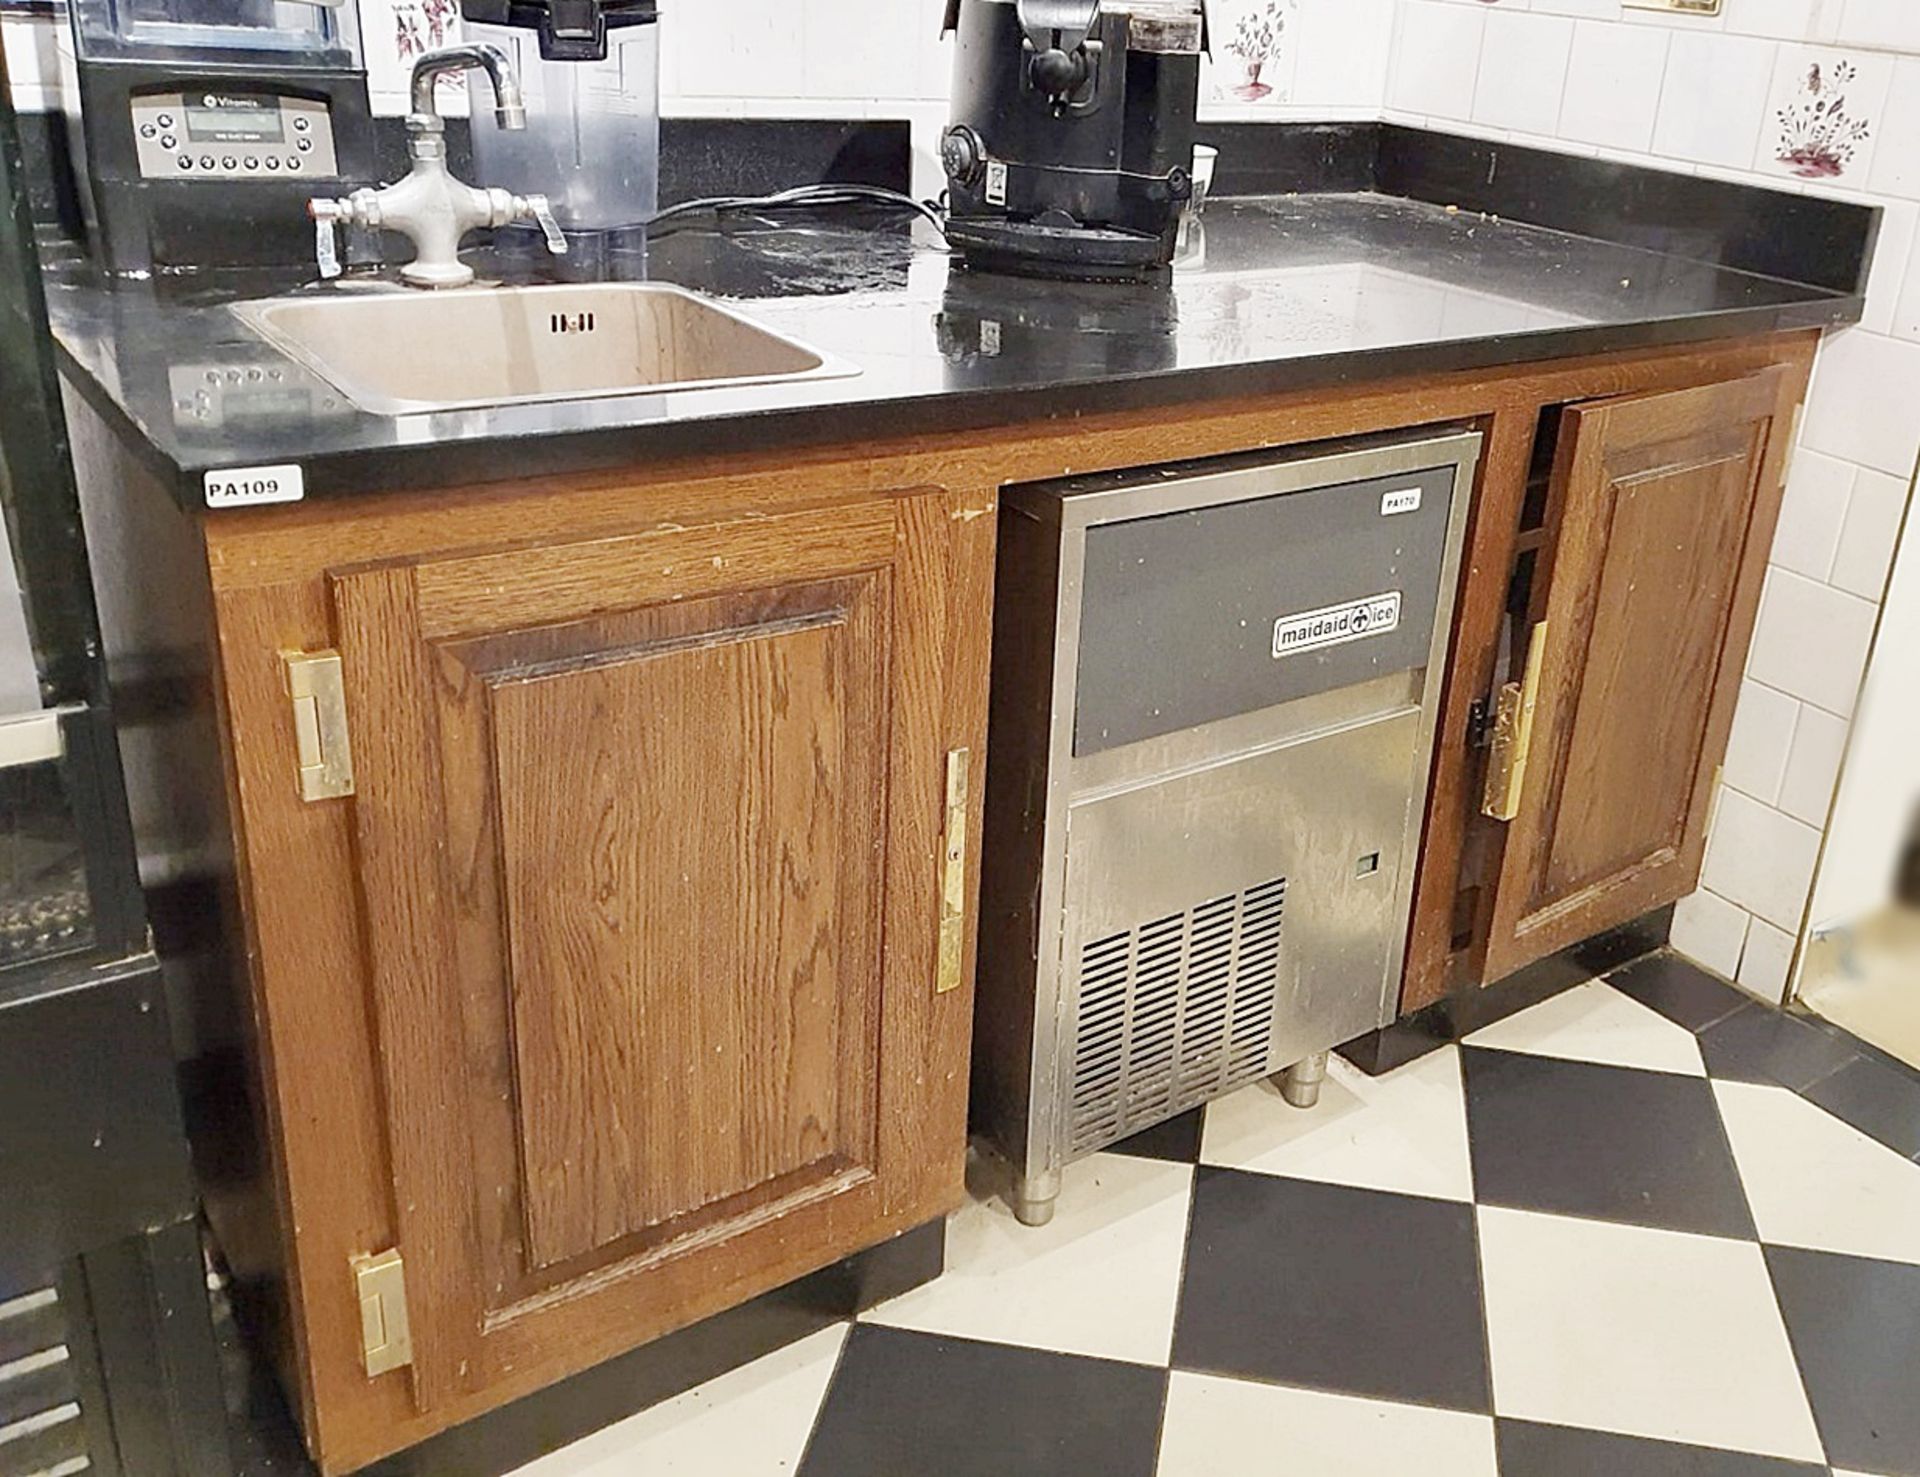 1 x Preparation Counter Unit With Oak Doors and Brass Hardware, Black Granite Work Surface and